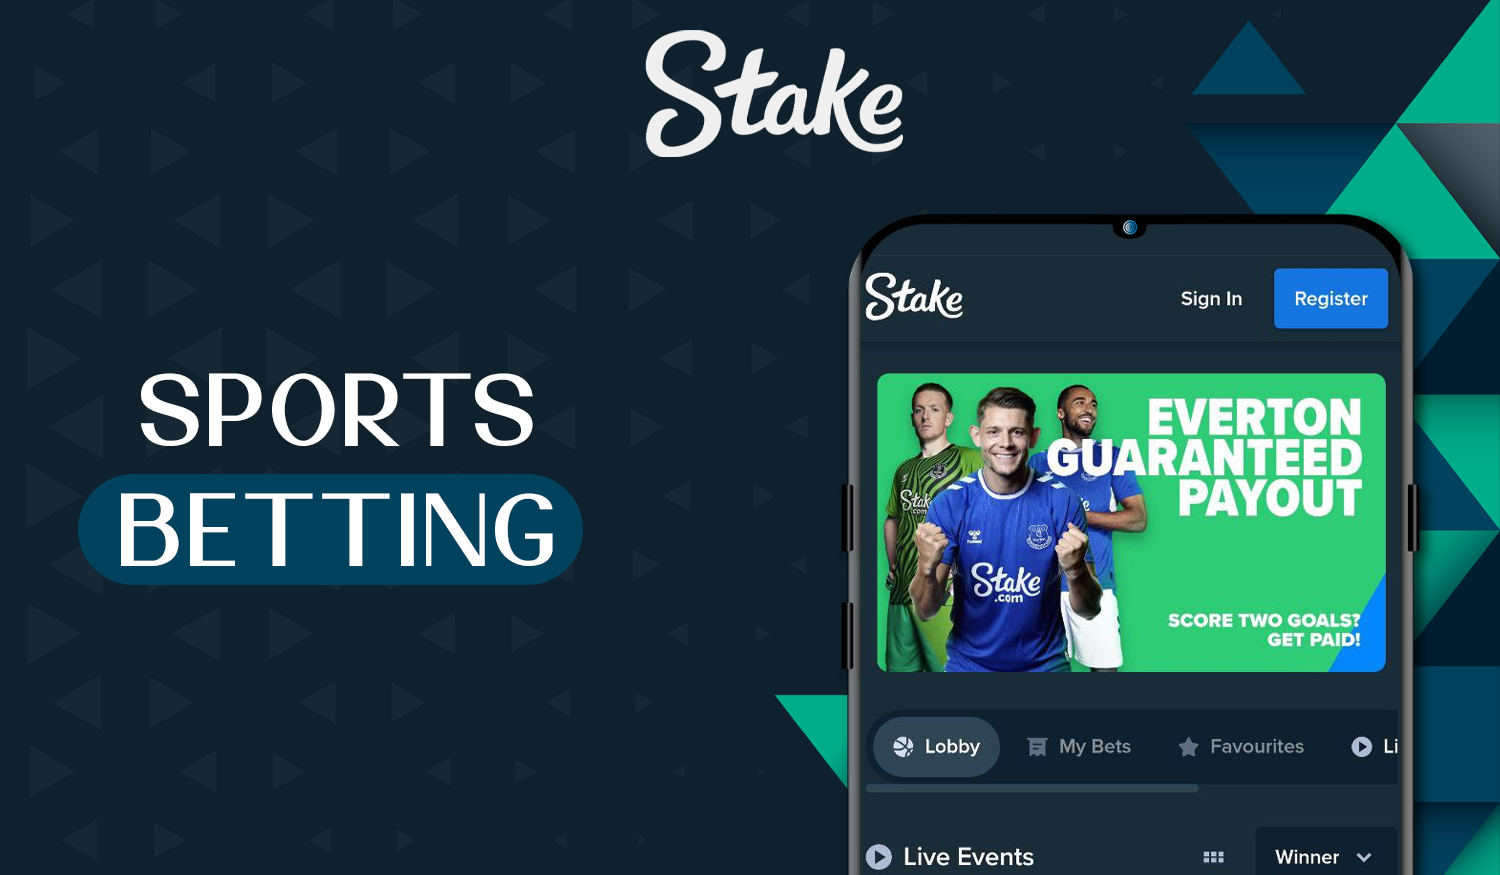 What sports users can bet on with the Stake app 